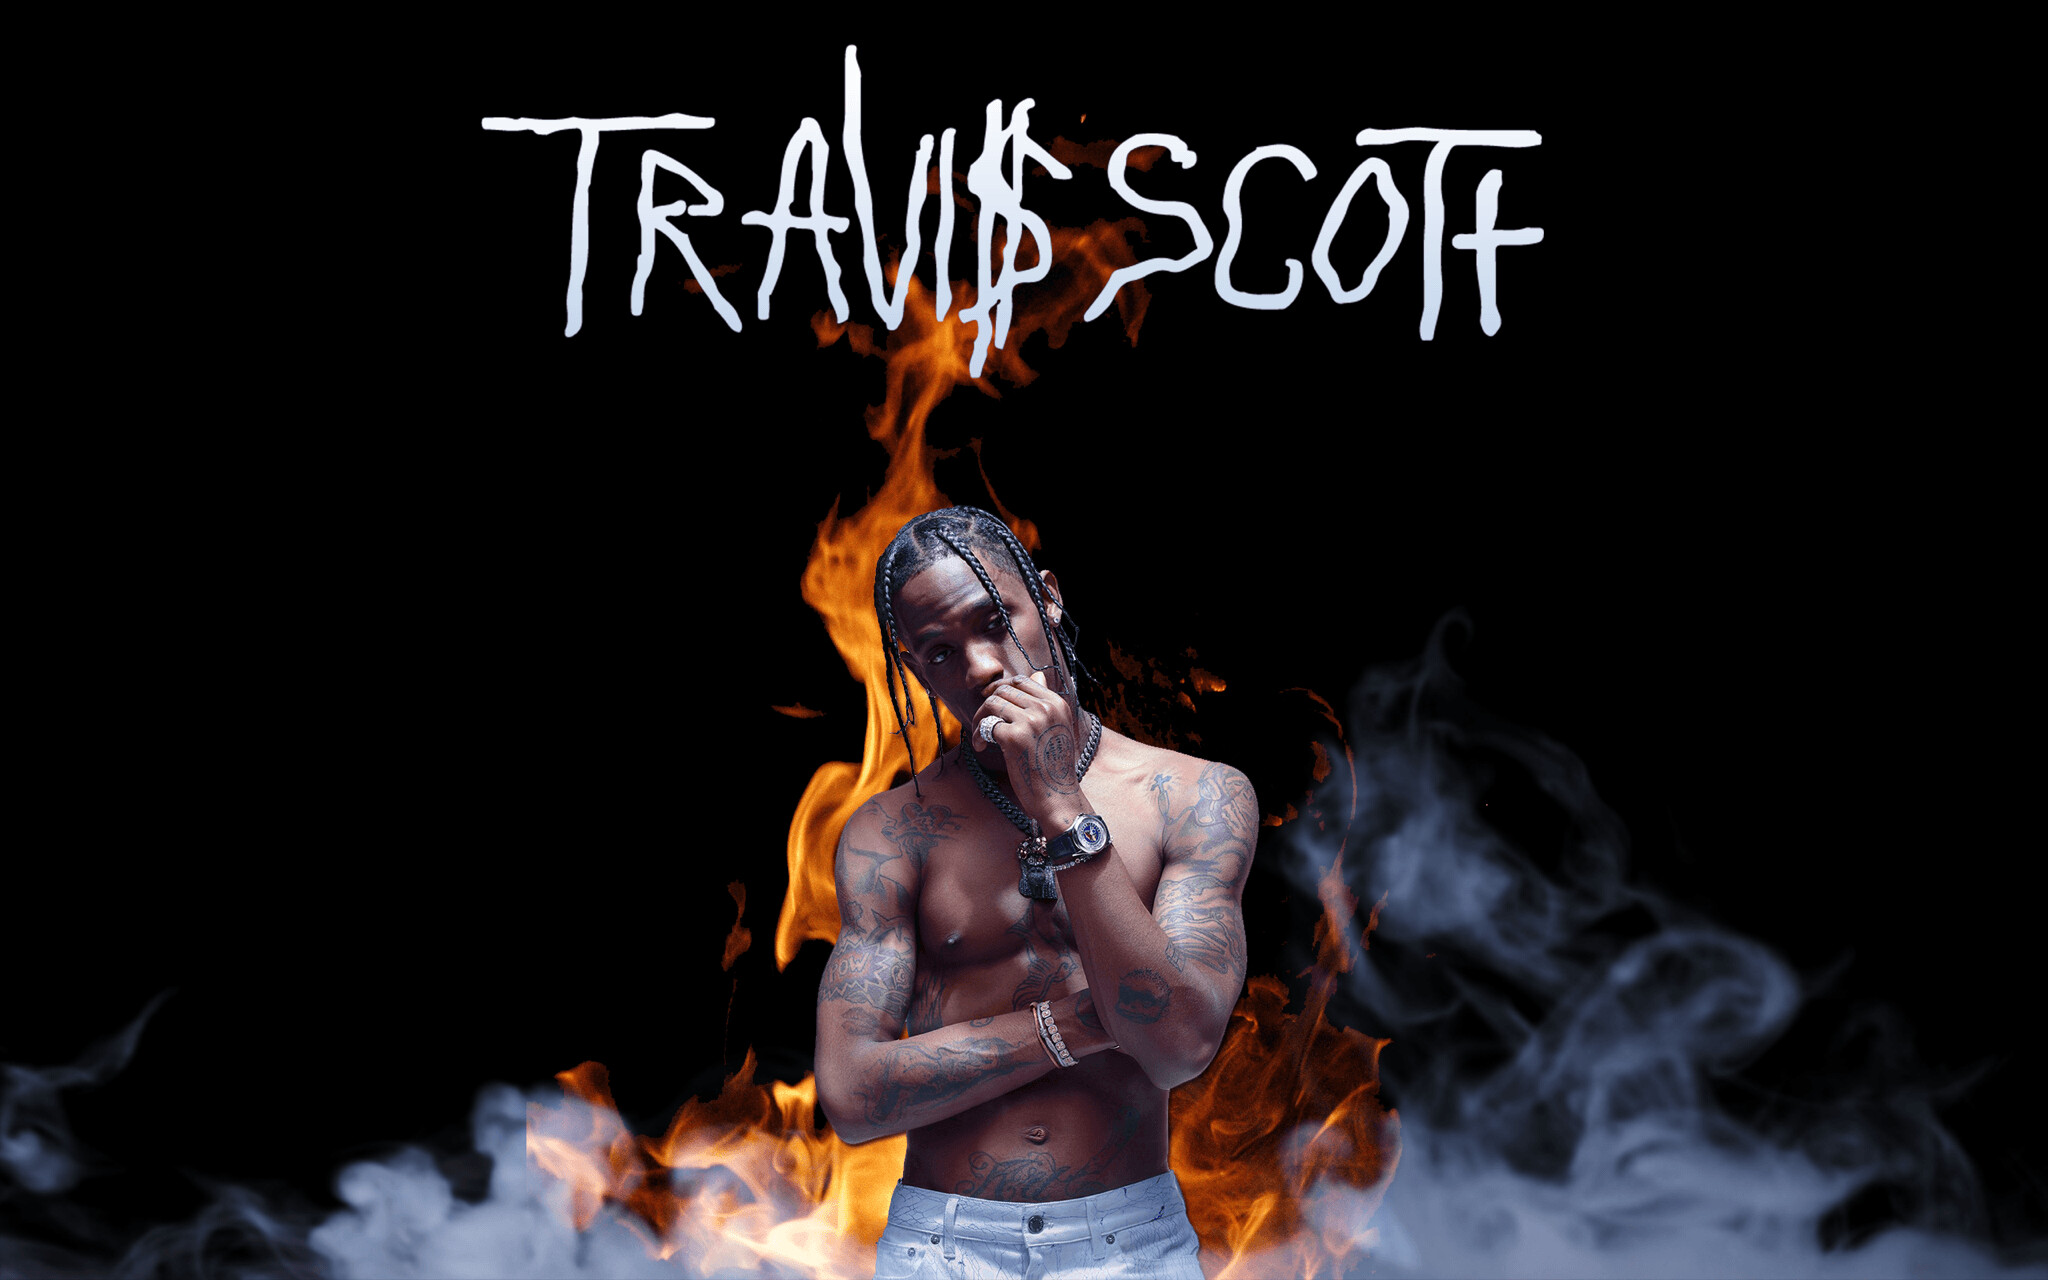 Travis Scott: Rapper and producer from Missouri City, Texas, began producing and releasing beats via Myspace at 16. 2050x1280 HD Wallpaper.